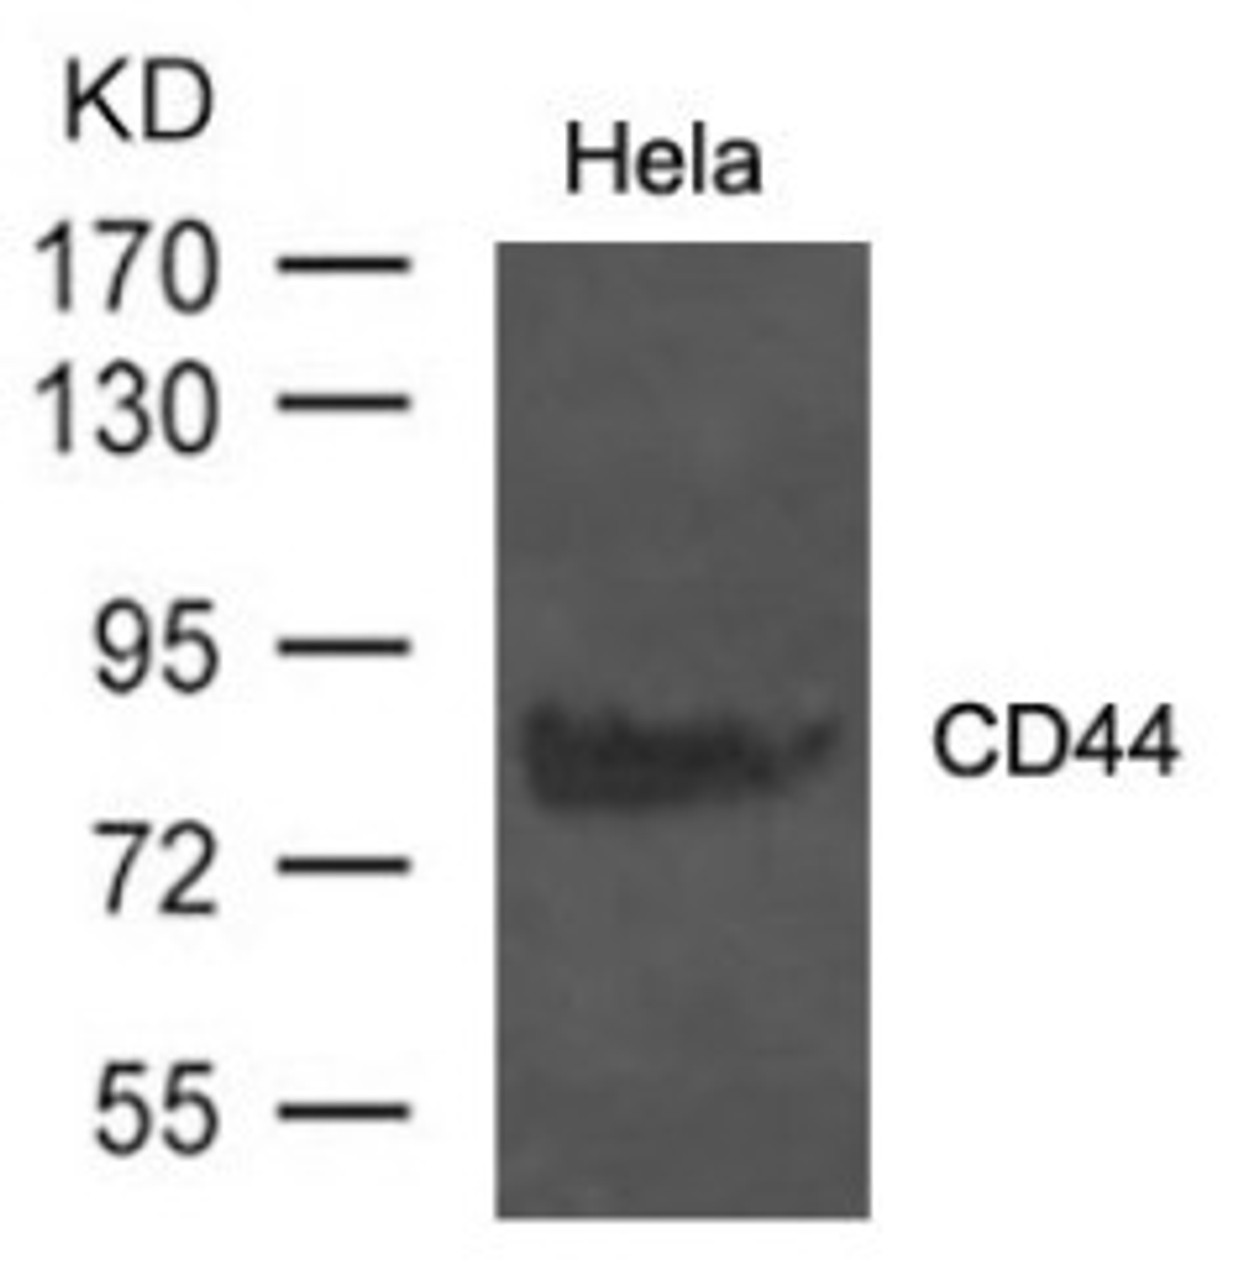 Western blot analysis of extract from HeLa cells using CD44 Antibody.